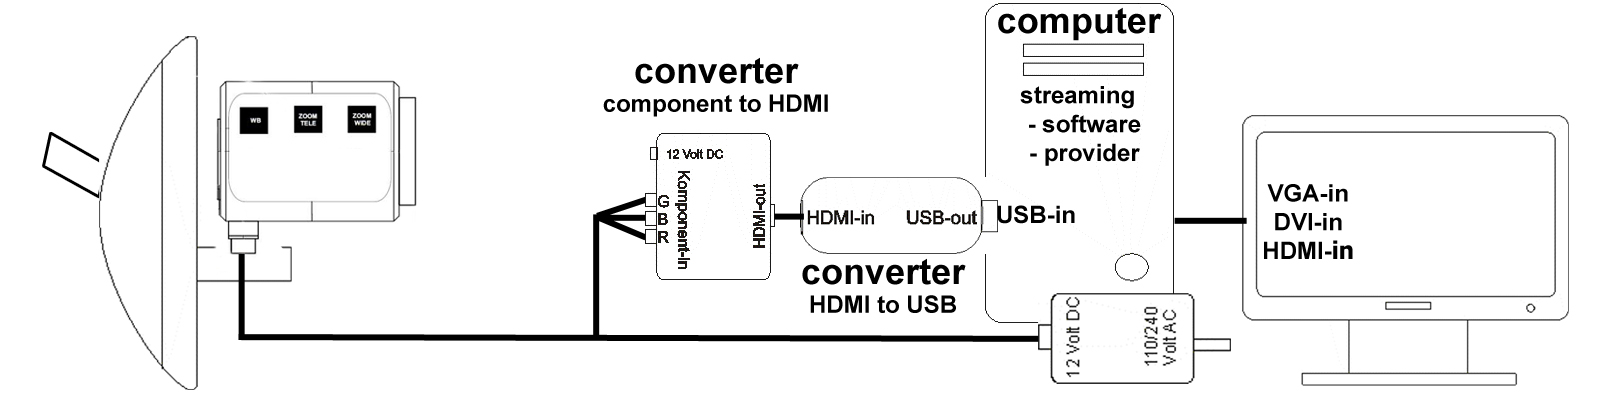 diagram thirdeye hd with computer for internet streaming